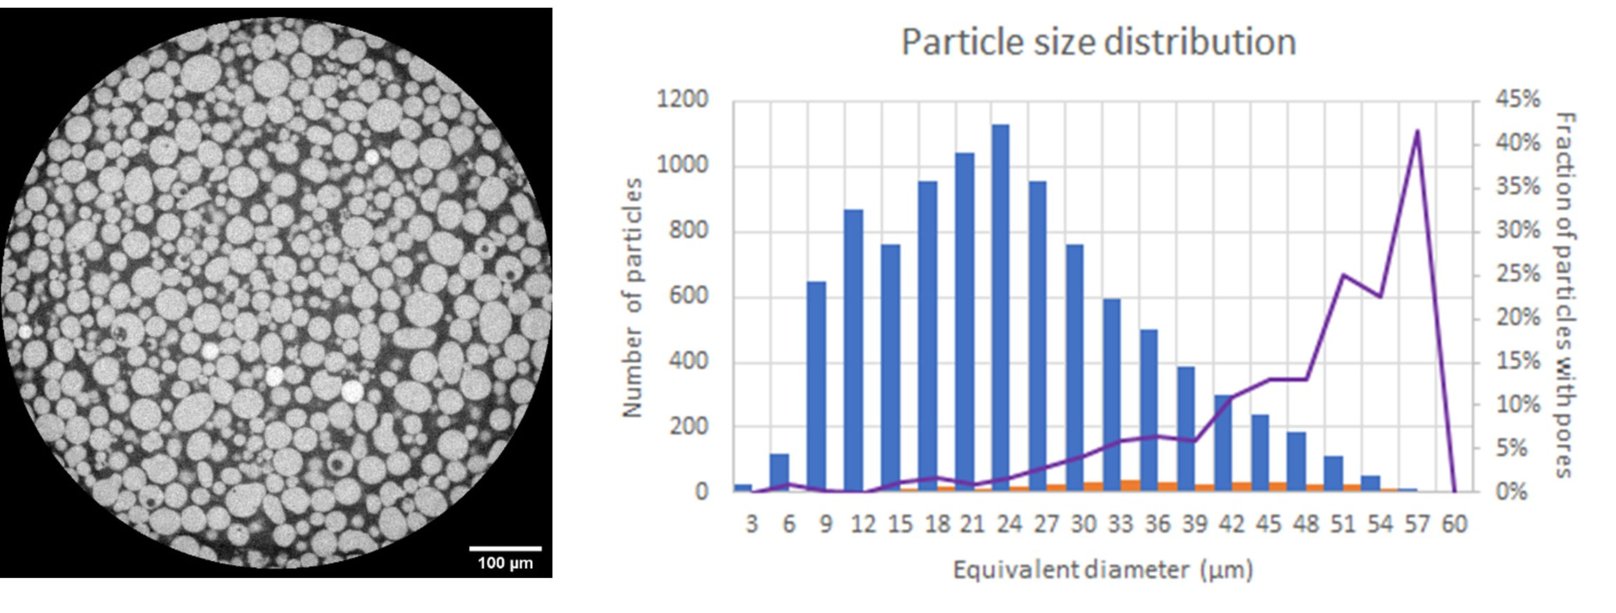 XCT slice image of metal powder and the resulting size distribution